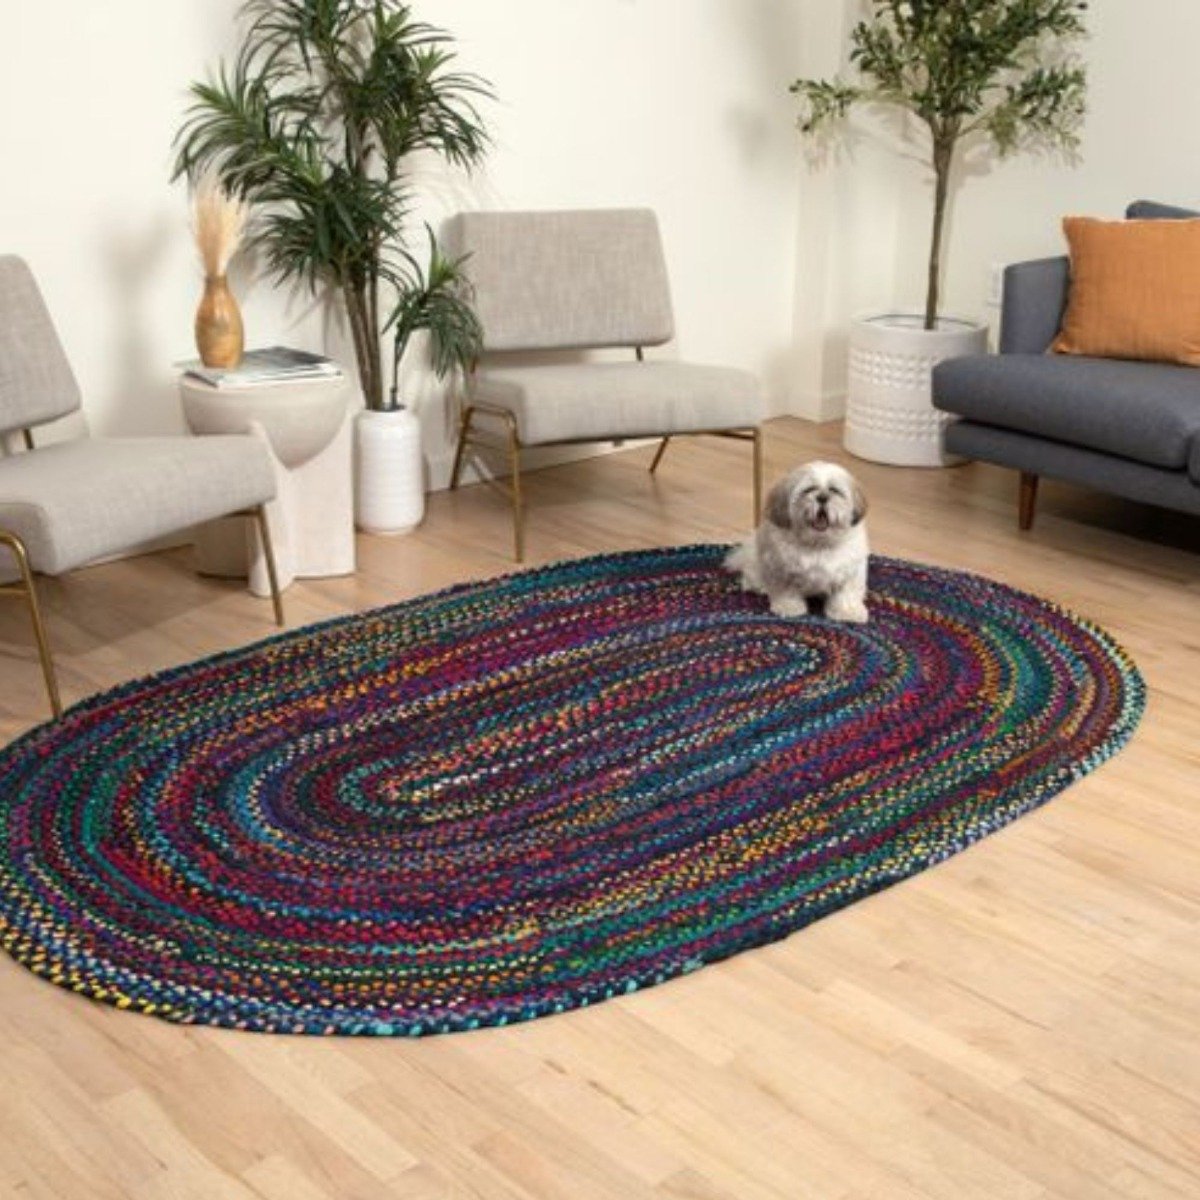 Reversible 5 X 7 Oval Area Rug for Living Room, Braided Entryways Rugs  Runner 4 X 6, Handwoven Chindi 3 X 5 Oval Area Rug for Bedroom 